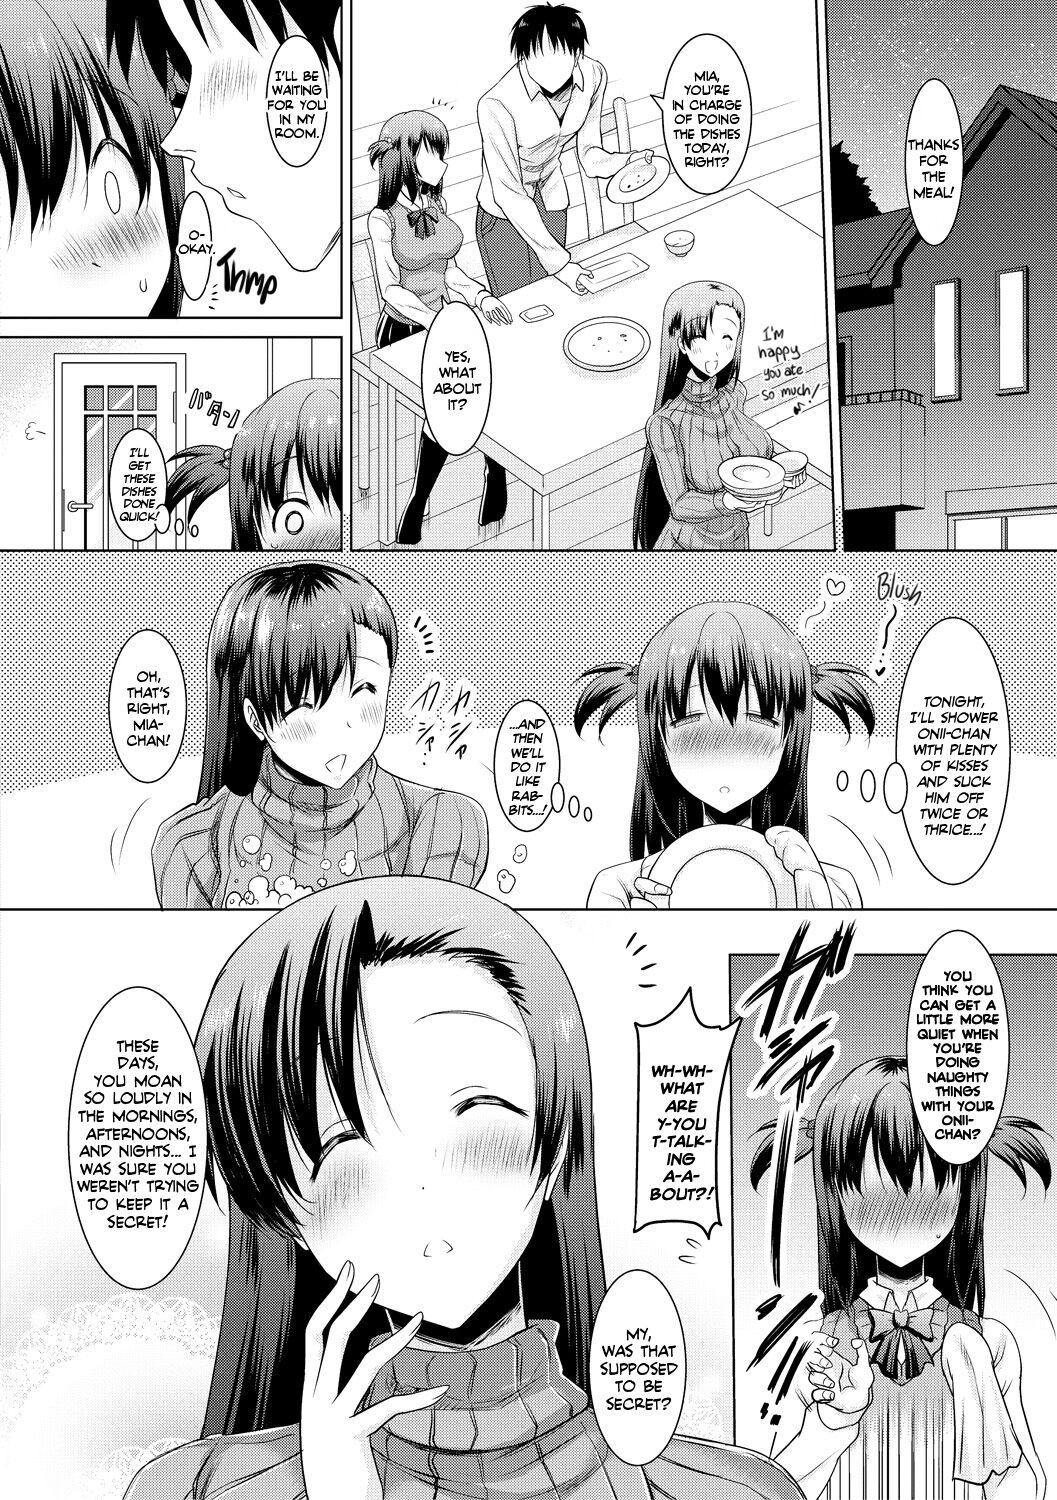 [Pony-R] I Can't Live Without My Little Sister's Tongue Chapter 01-02 + Secret Baby-making Sex with a Big-titted Mother and Daughter! (Kyonyuu Oyako no Shita to Shikyuu ni Renzoku Shasei) [English] [Team Rabu2] [Digital] 43